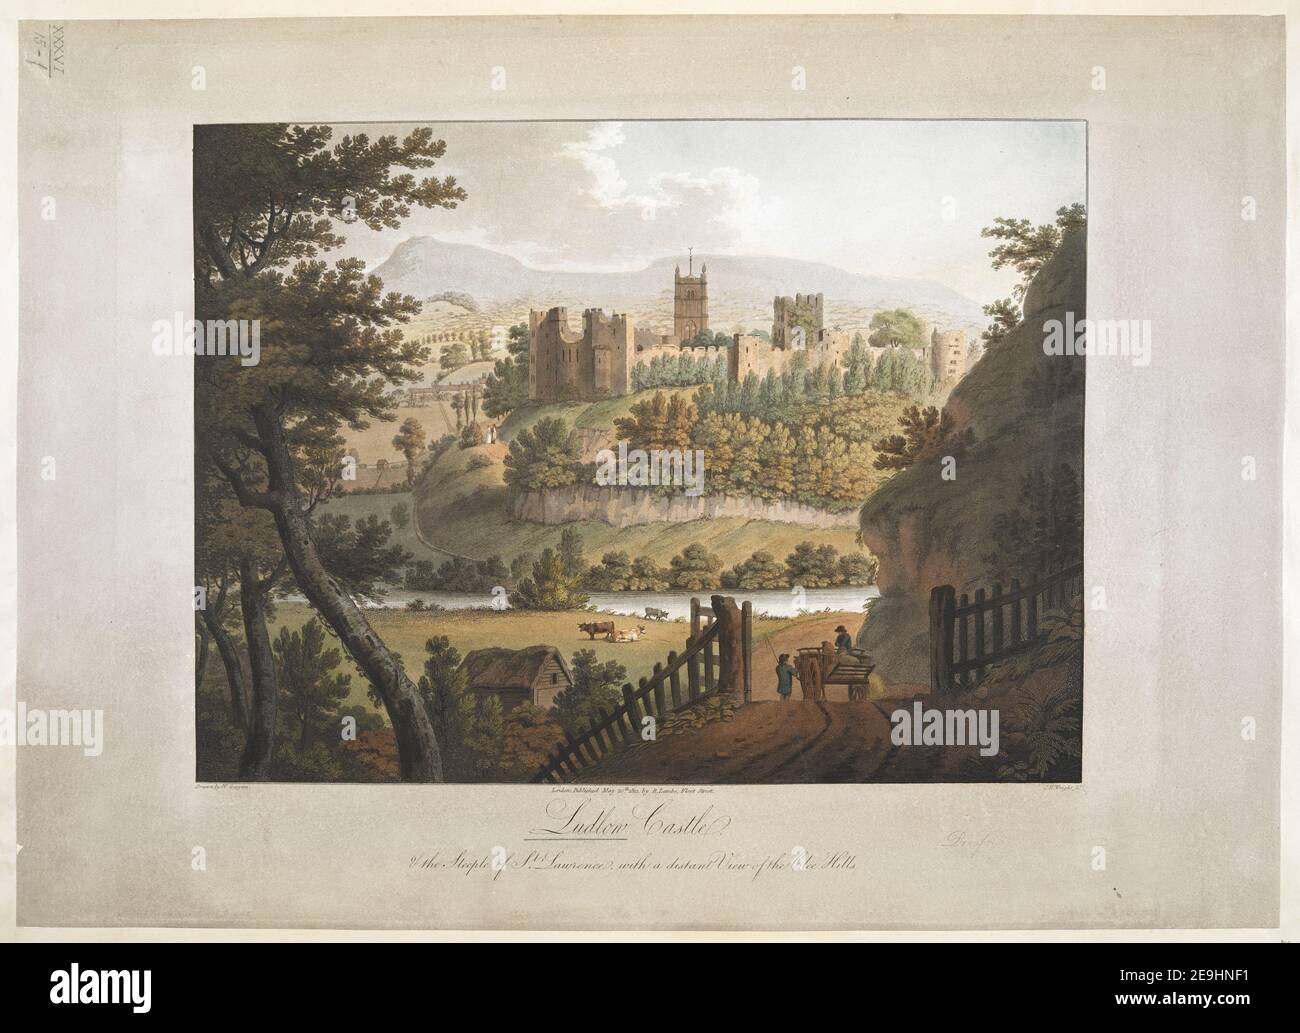 Ludlow Castle  Author  Wright, J. H. 36.15.f. Place of publication: London Publisher: Published May 20th 1812 by R Lambe, Fleet Street., Date of publication: [May 20 1812]  Item type: 1 print Medium: aquatint and etching with hand-colouring Dimensions: platemark 41 x 48.7 cm, on sheet 42.4 x 58.9 cm  Former owner: George III, King of Great Britain, 1738-1820 Stock Photo